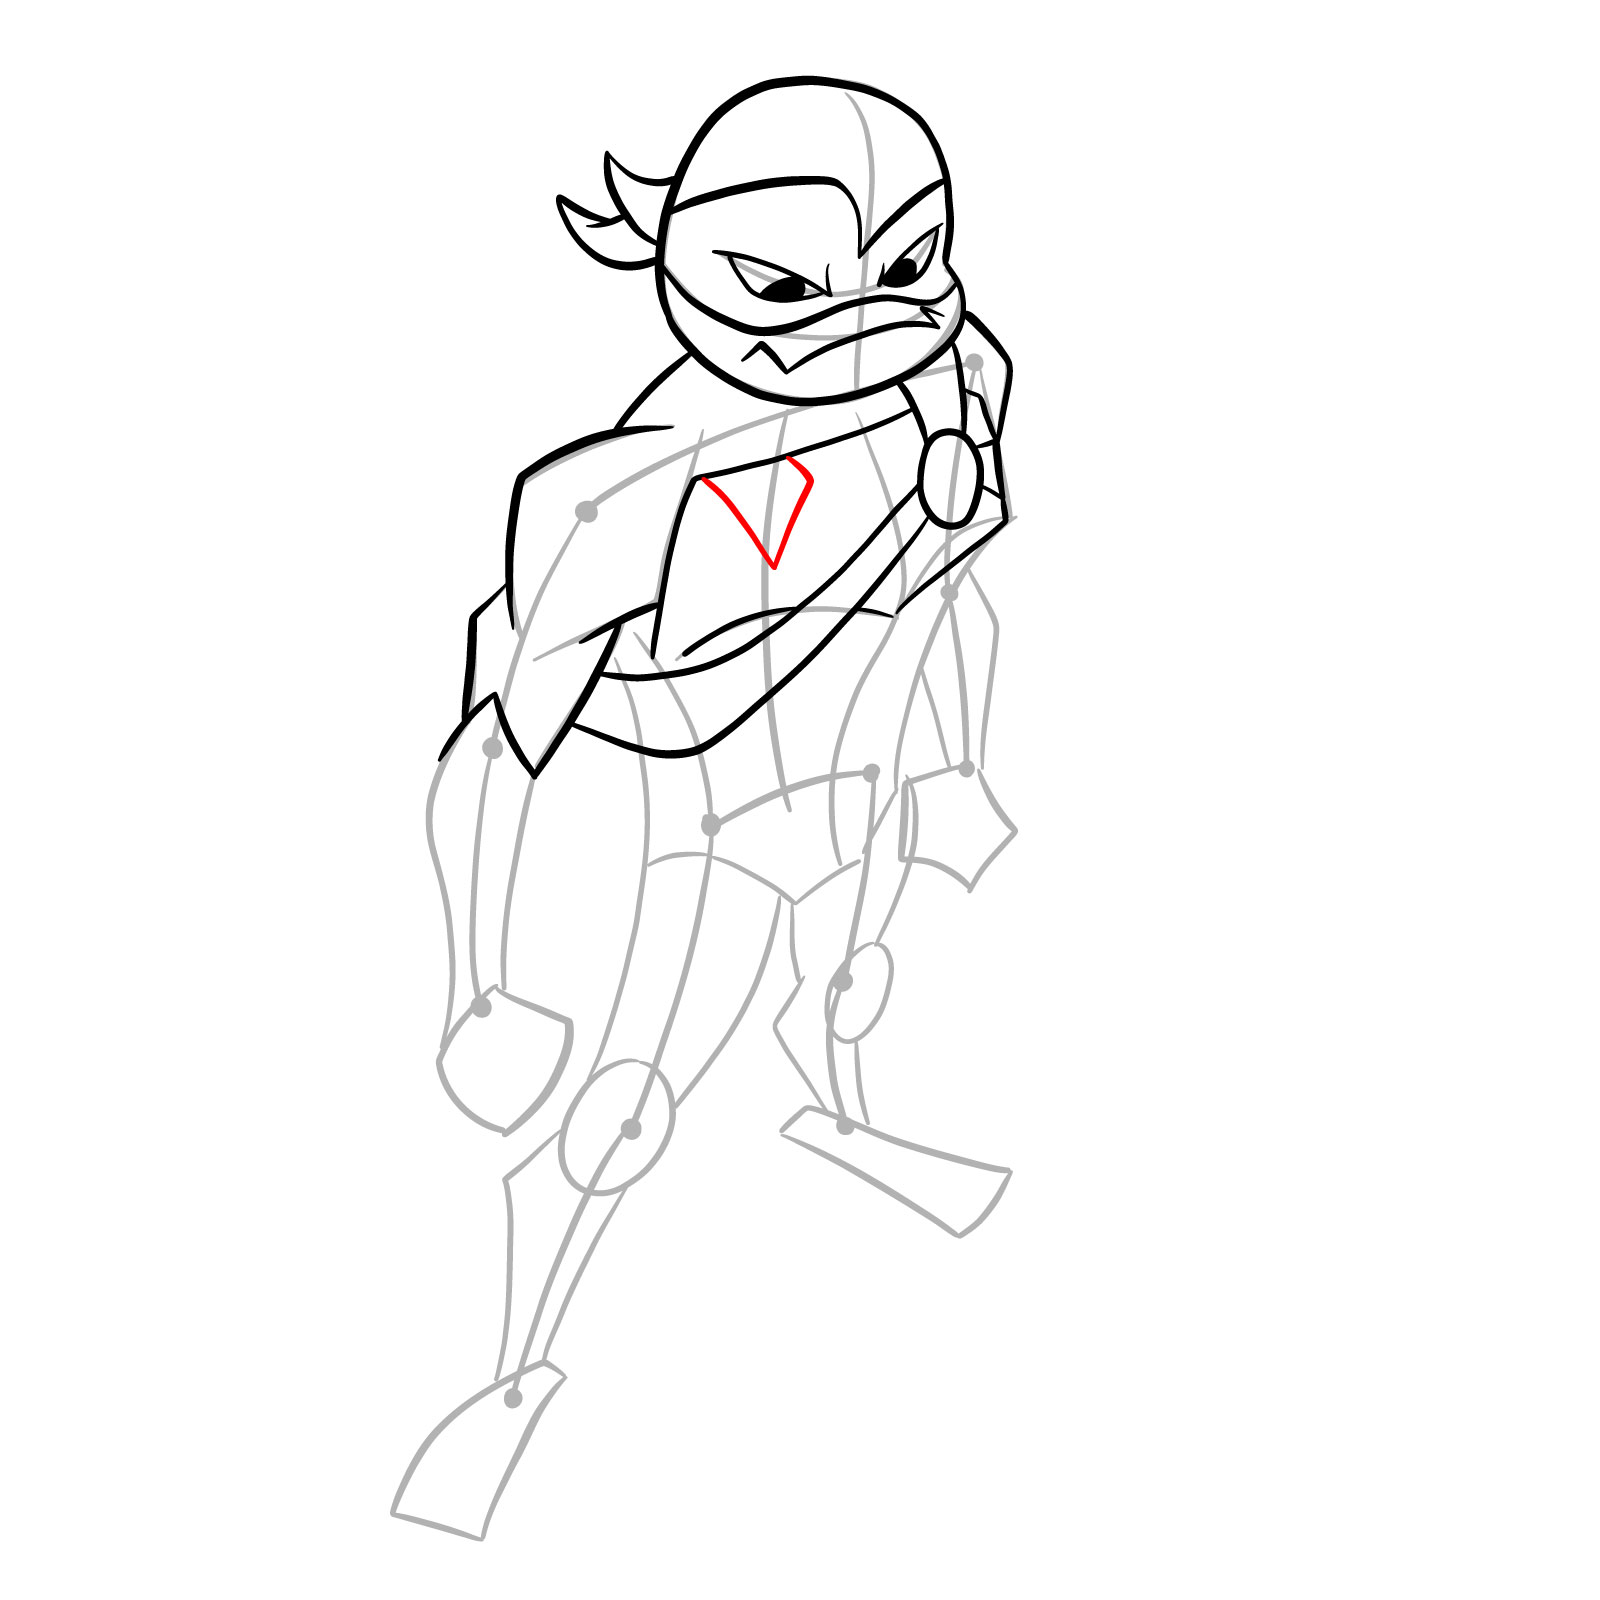 How to draw Mikey in Hamato Ninpō state - step 14